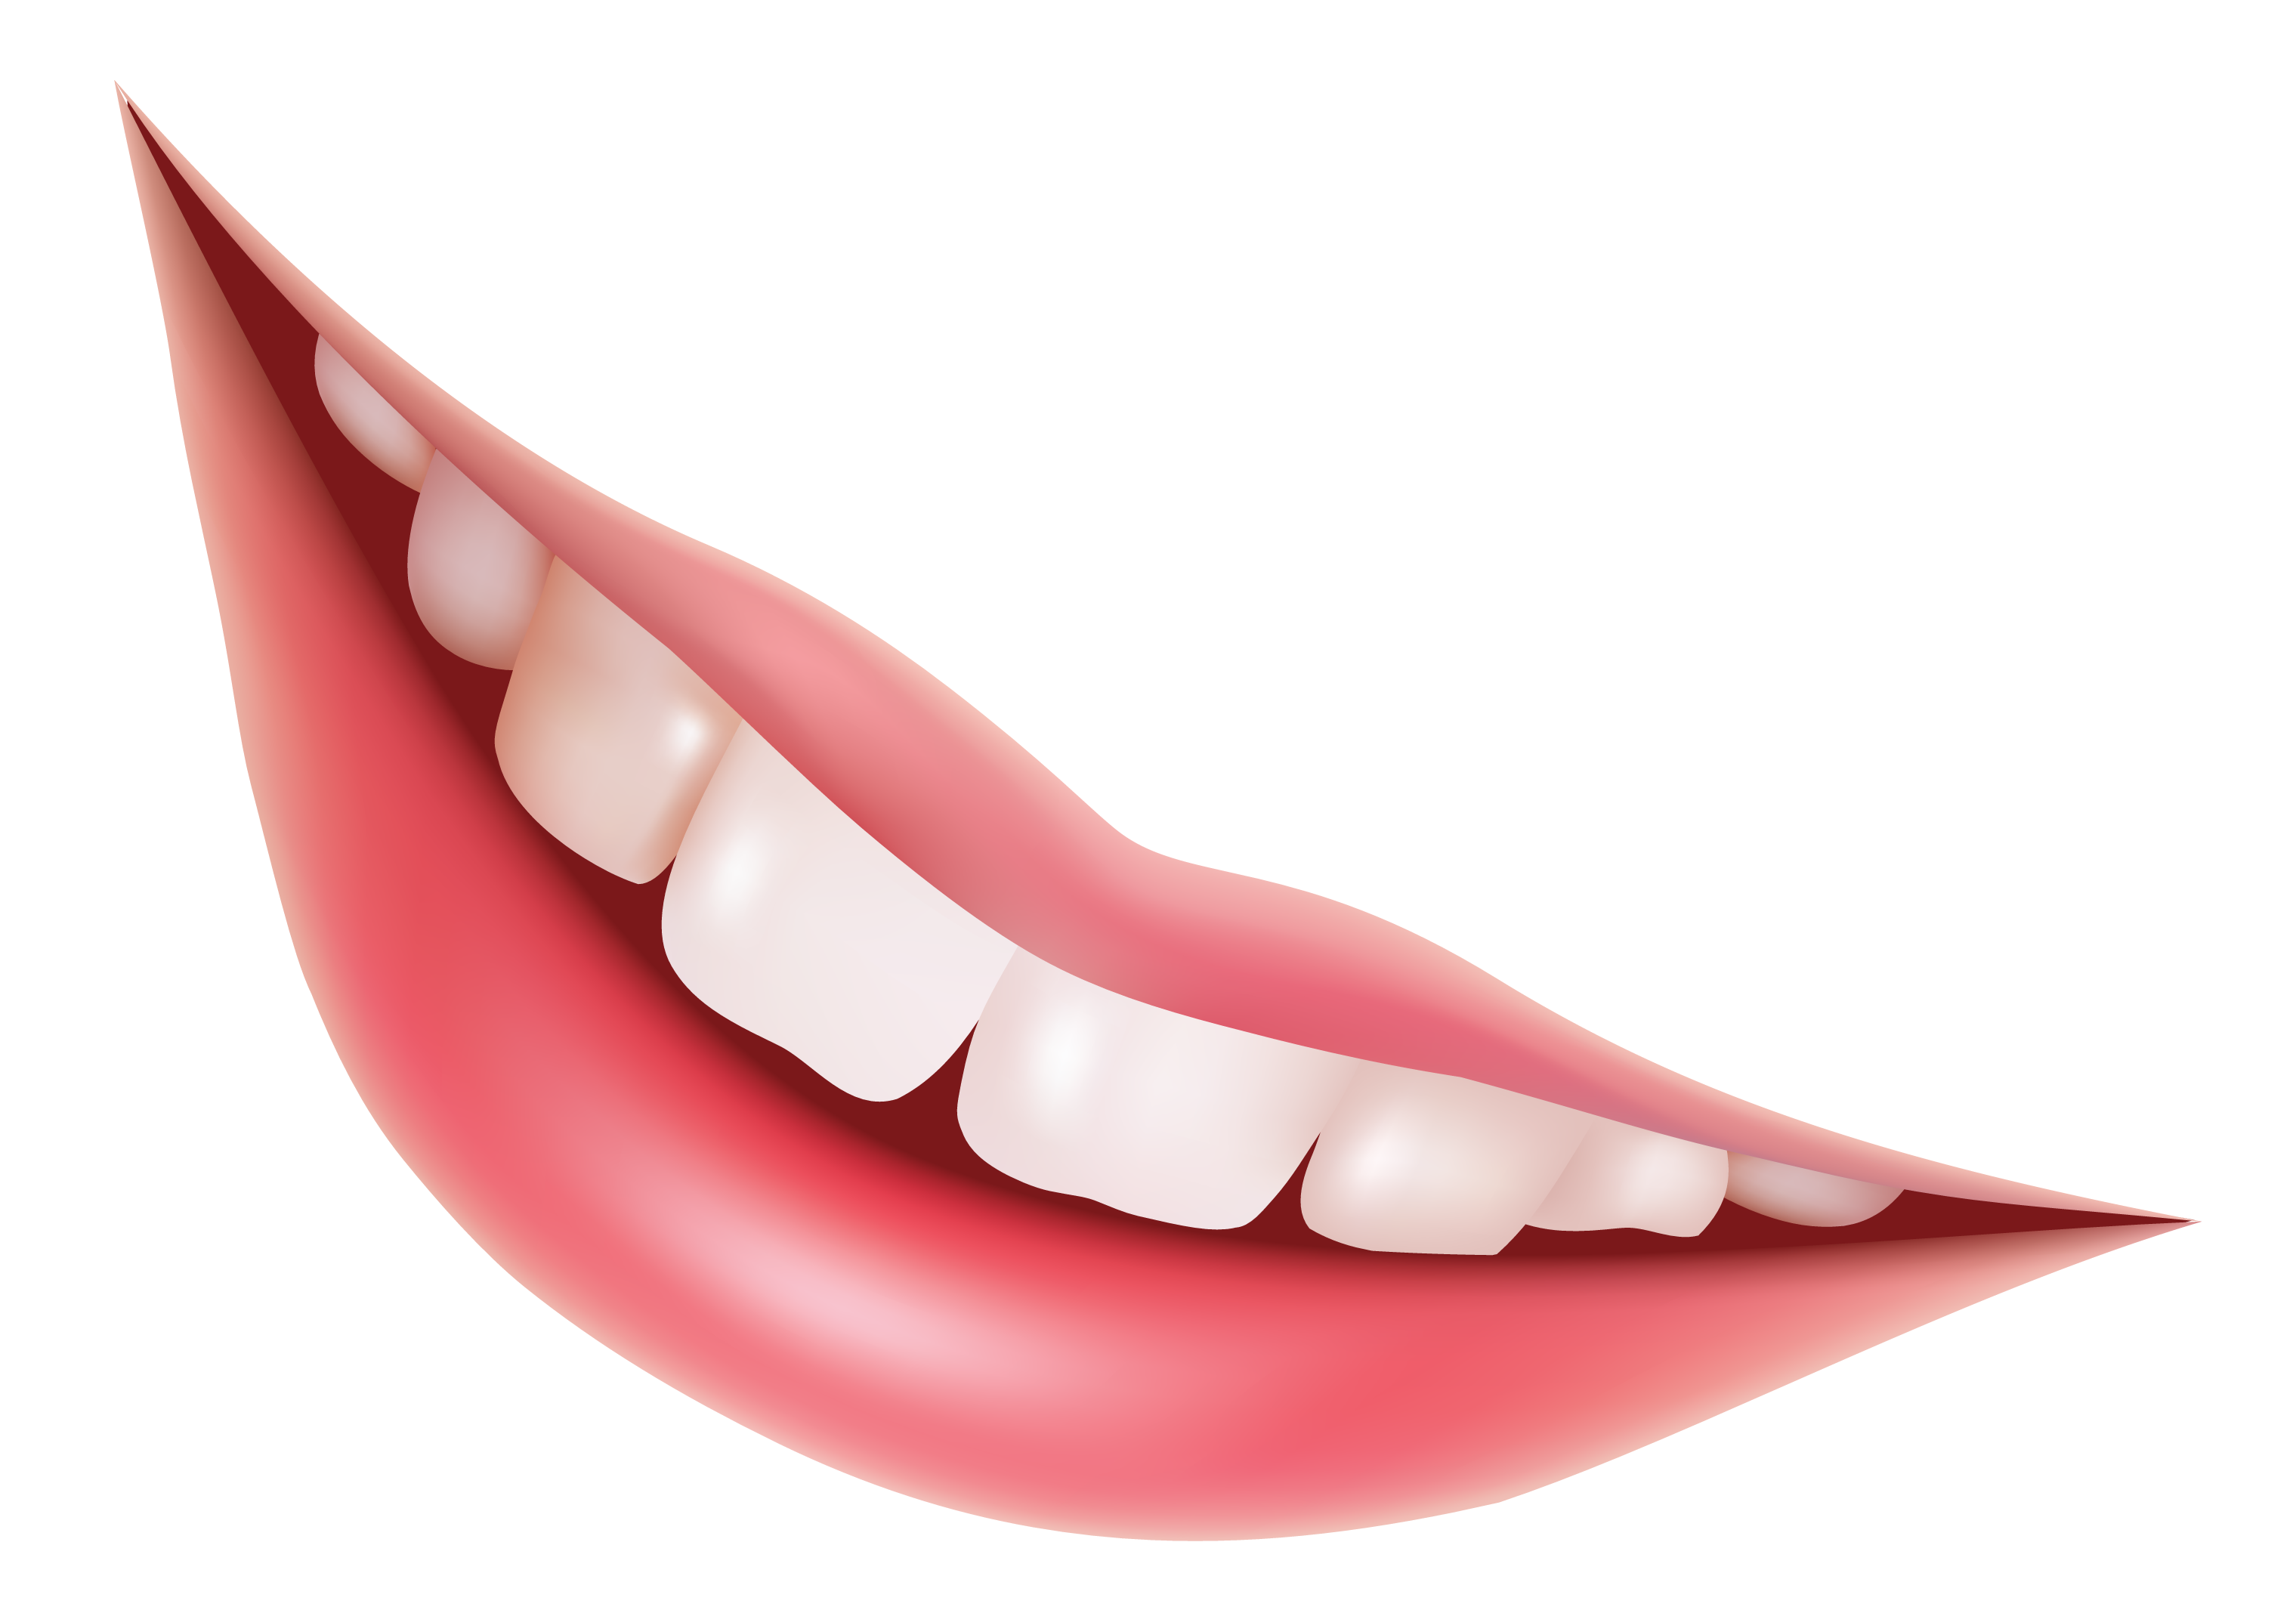 Teeth Icon Smiling PNG High Definition Photo Image pngteam.com